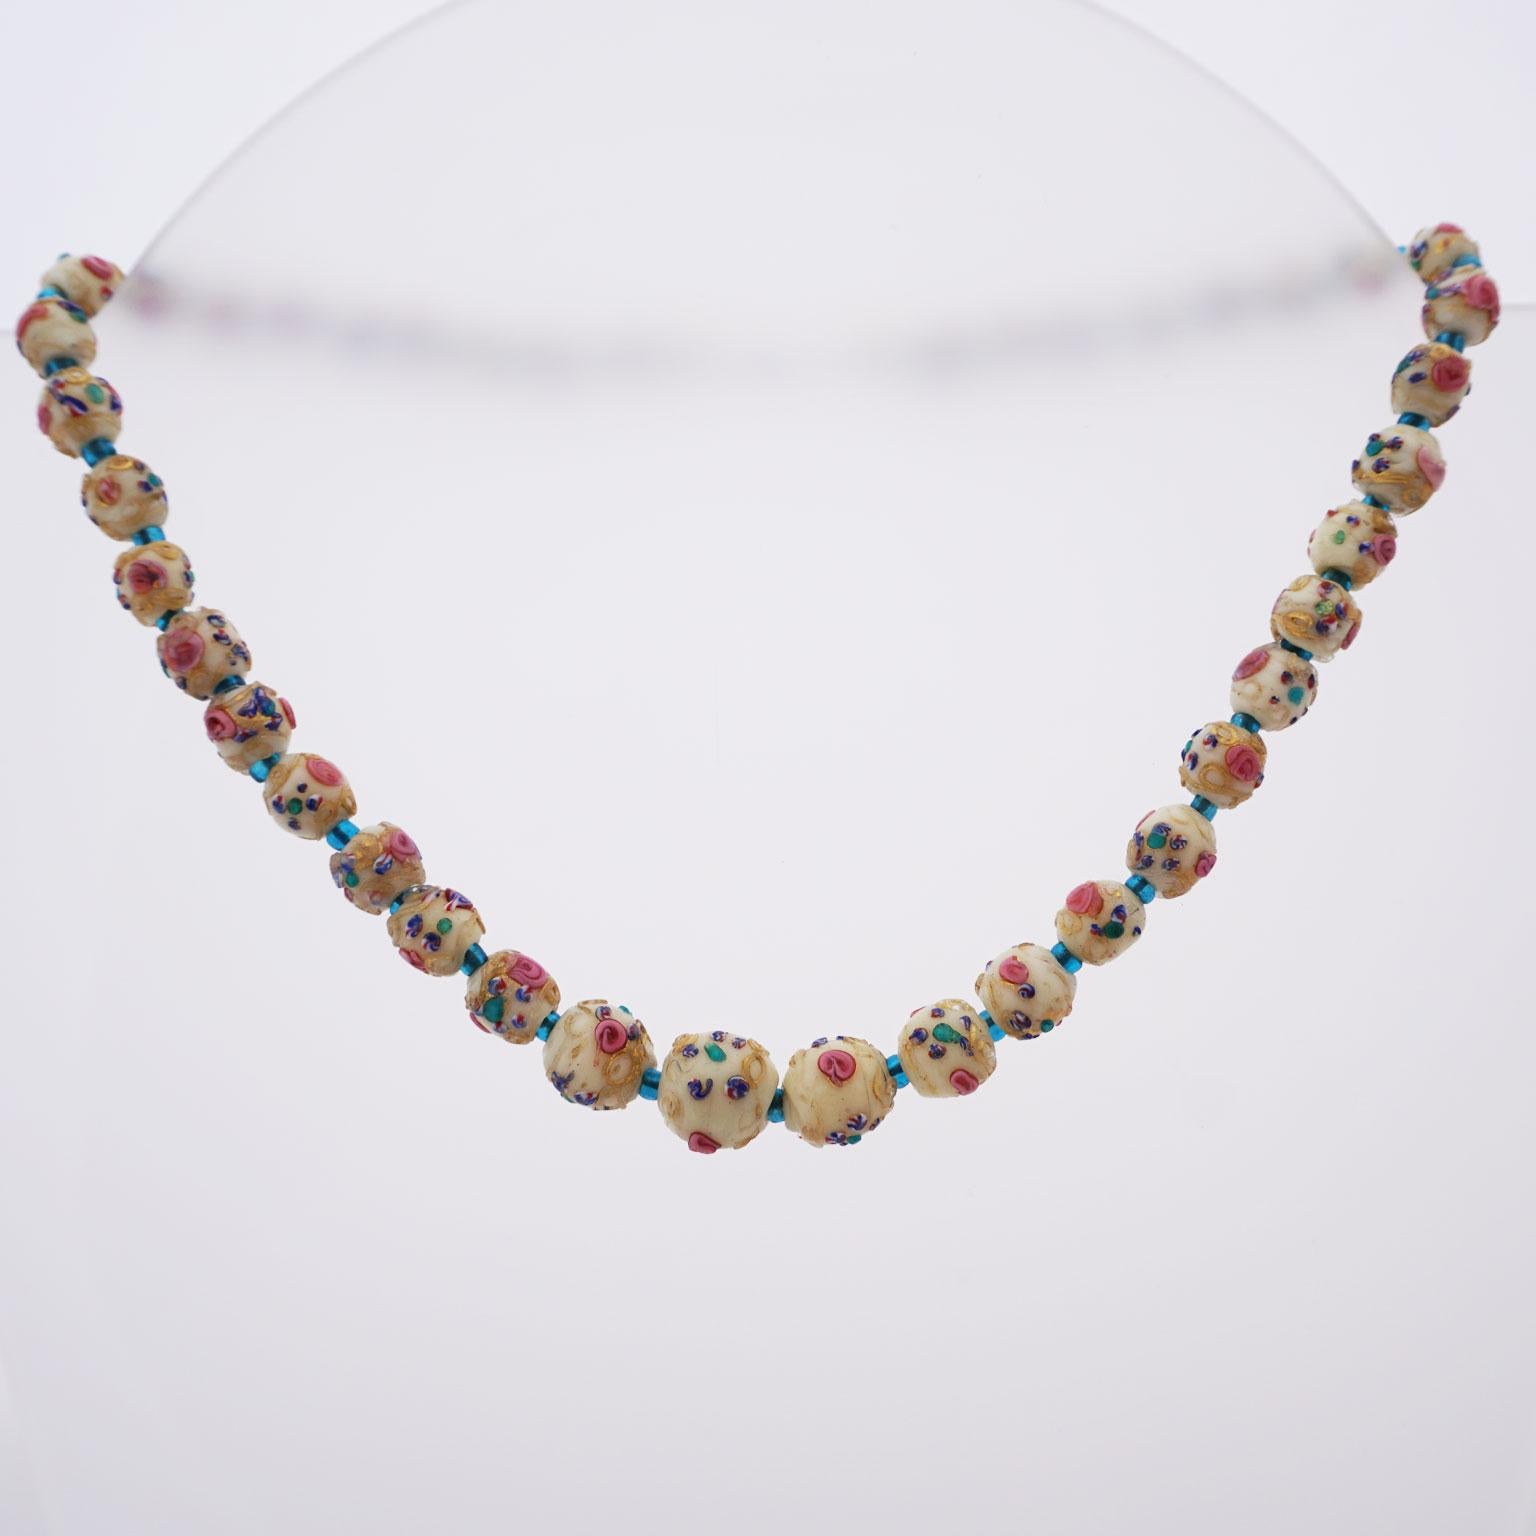 Murano necklace Millefiori around 1910

Necklace in the handcrafted style of the Millefiori (1000 flowers). Various naps and thread elements have been applied to opaque base pearls and fused so that a colourful flower pattern is associated. This